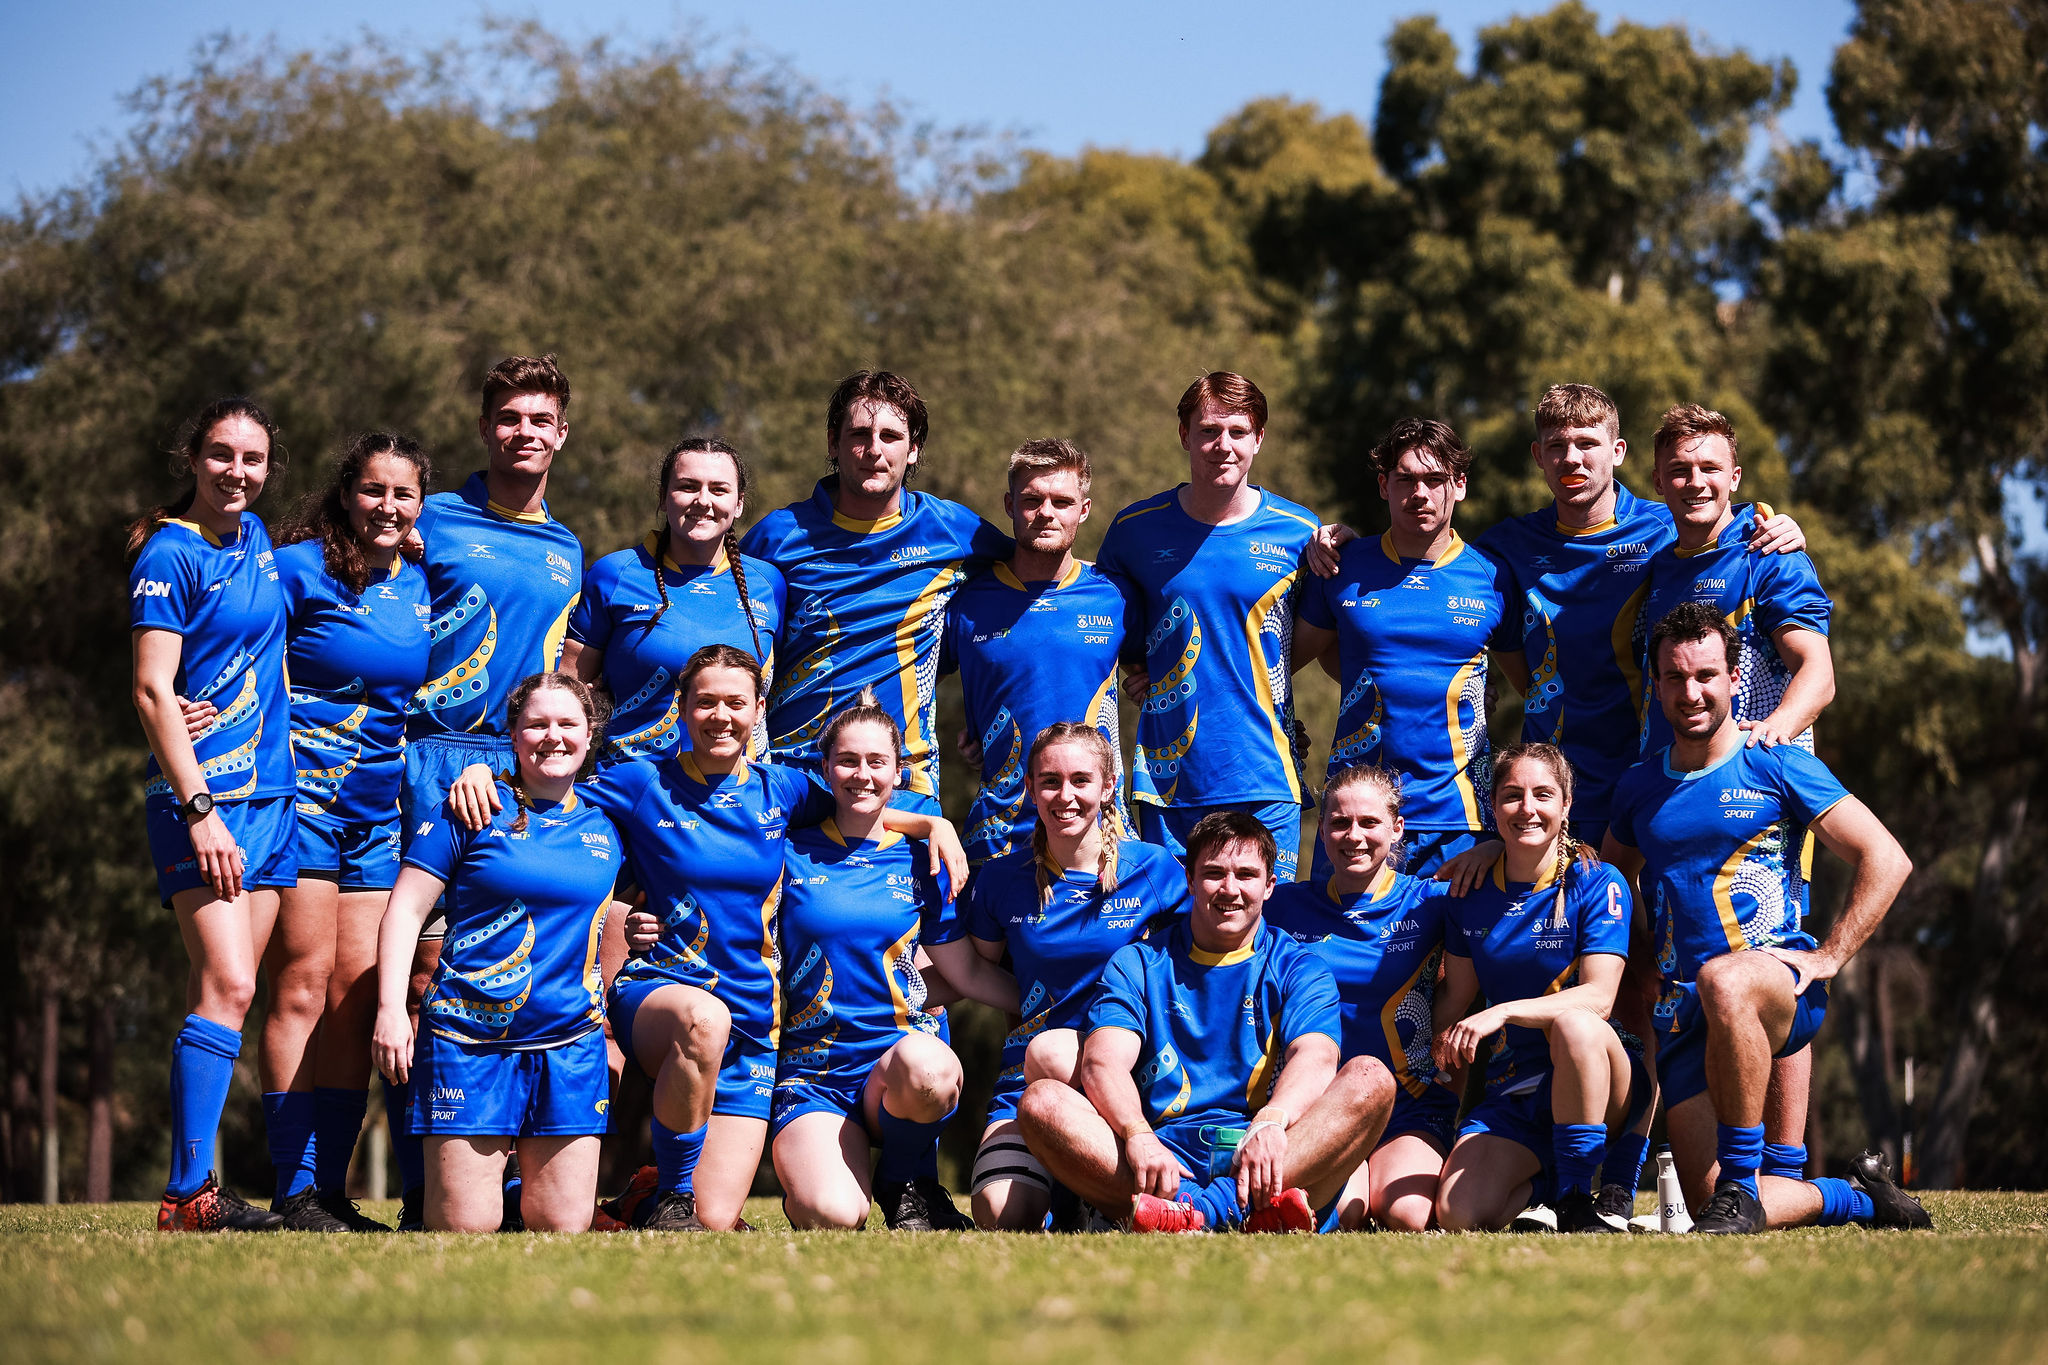 The UWA Nationals team pose for a photo on the field